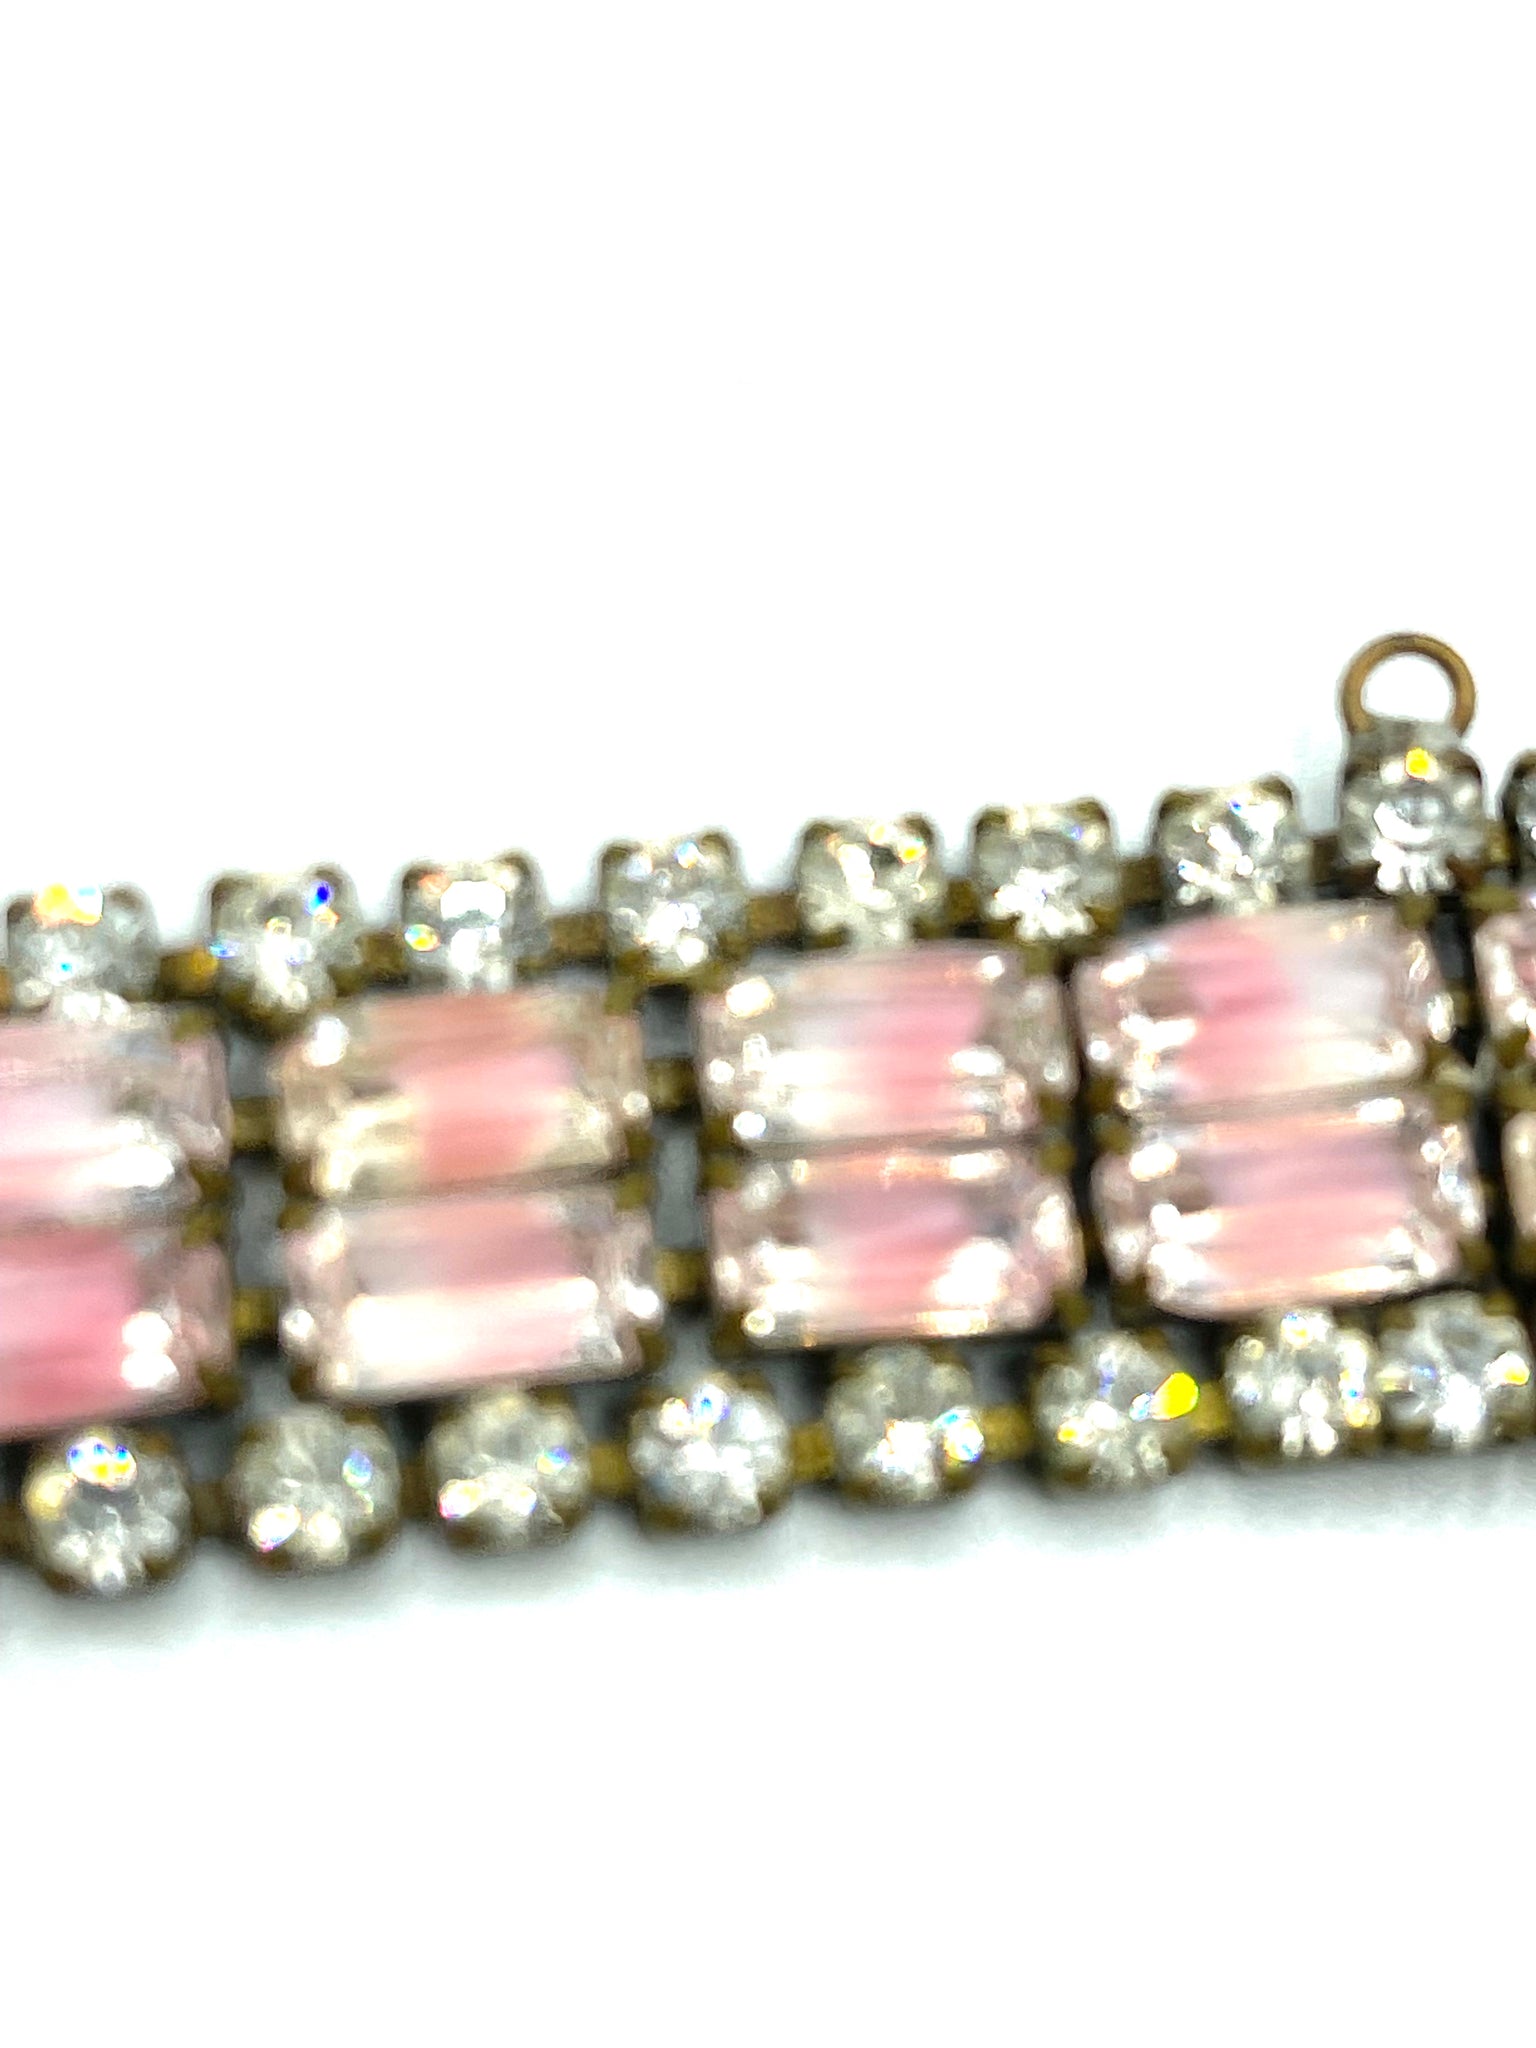 50s  Bracelet Rhinestone Glamour with Iridescent Pink Accent DETAIL 4 of 5